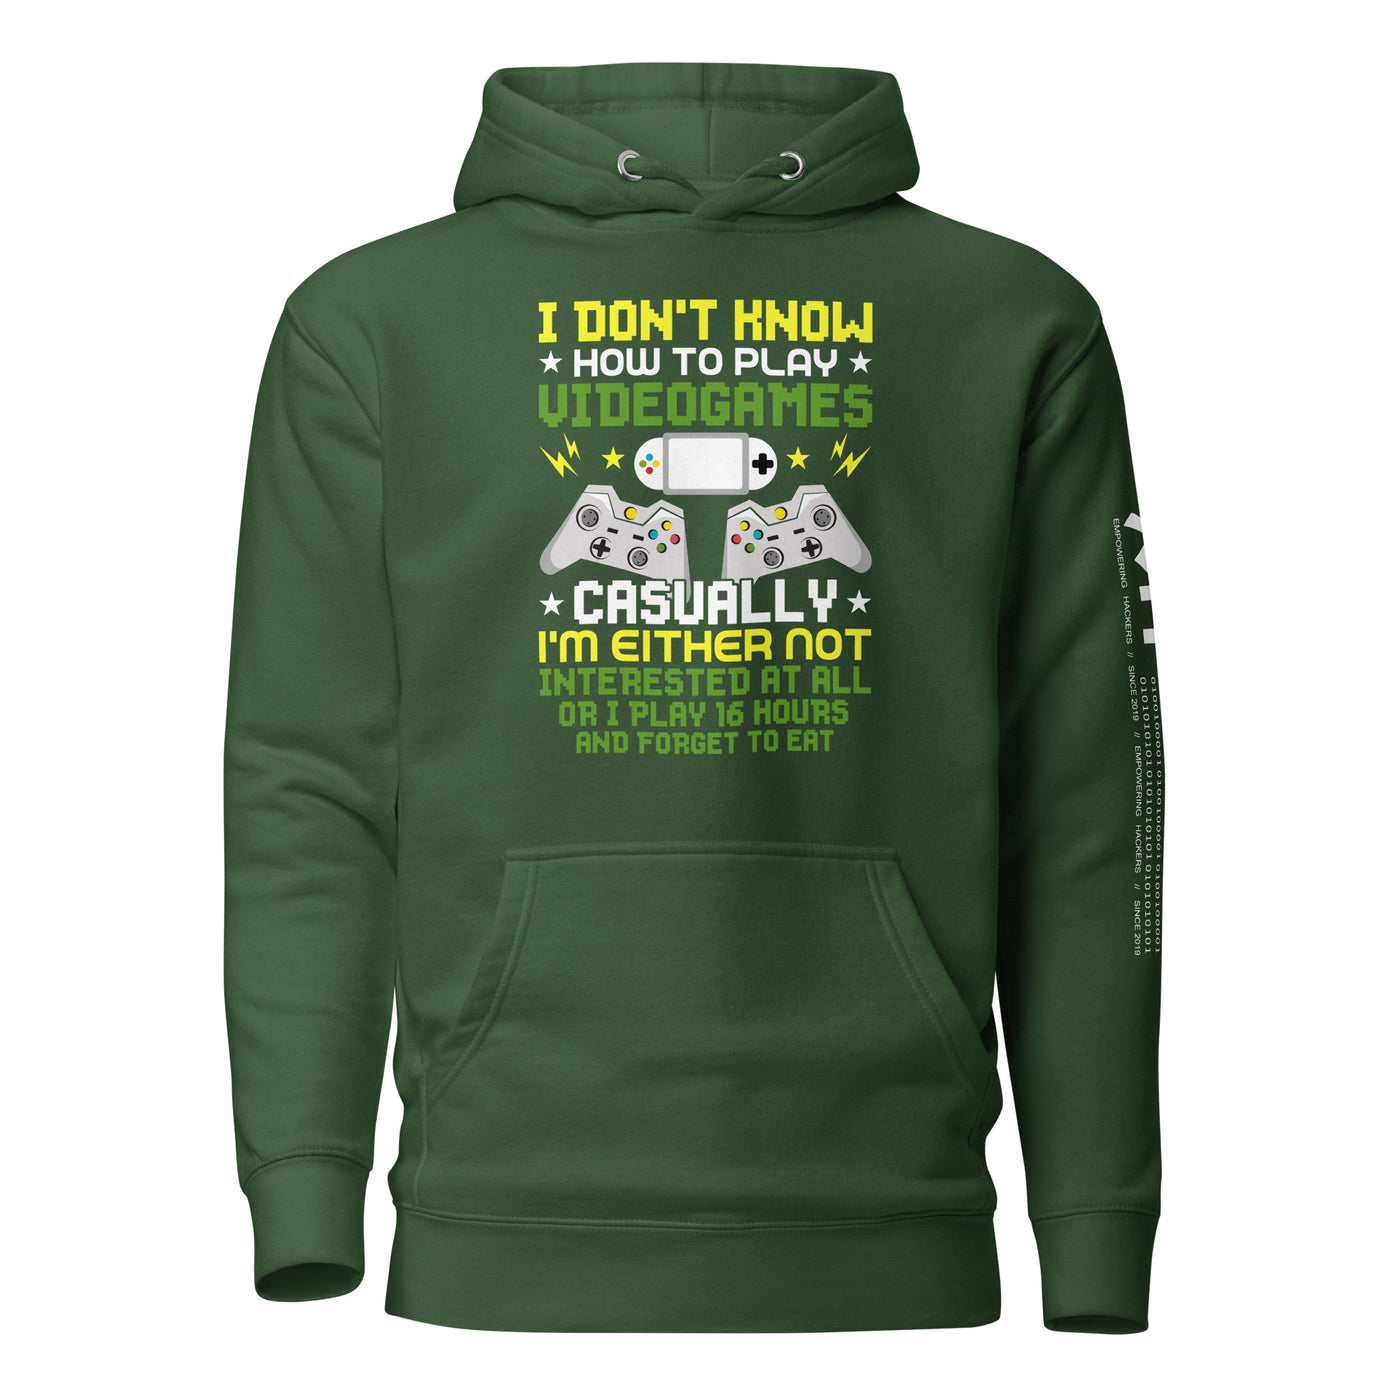 I don't know how to play video games - Unisex Hoodie